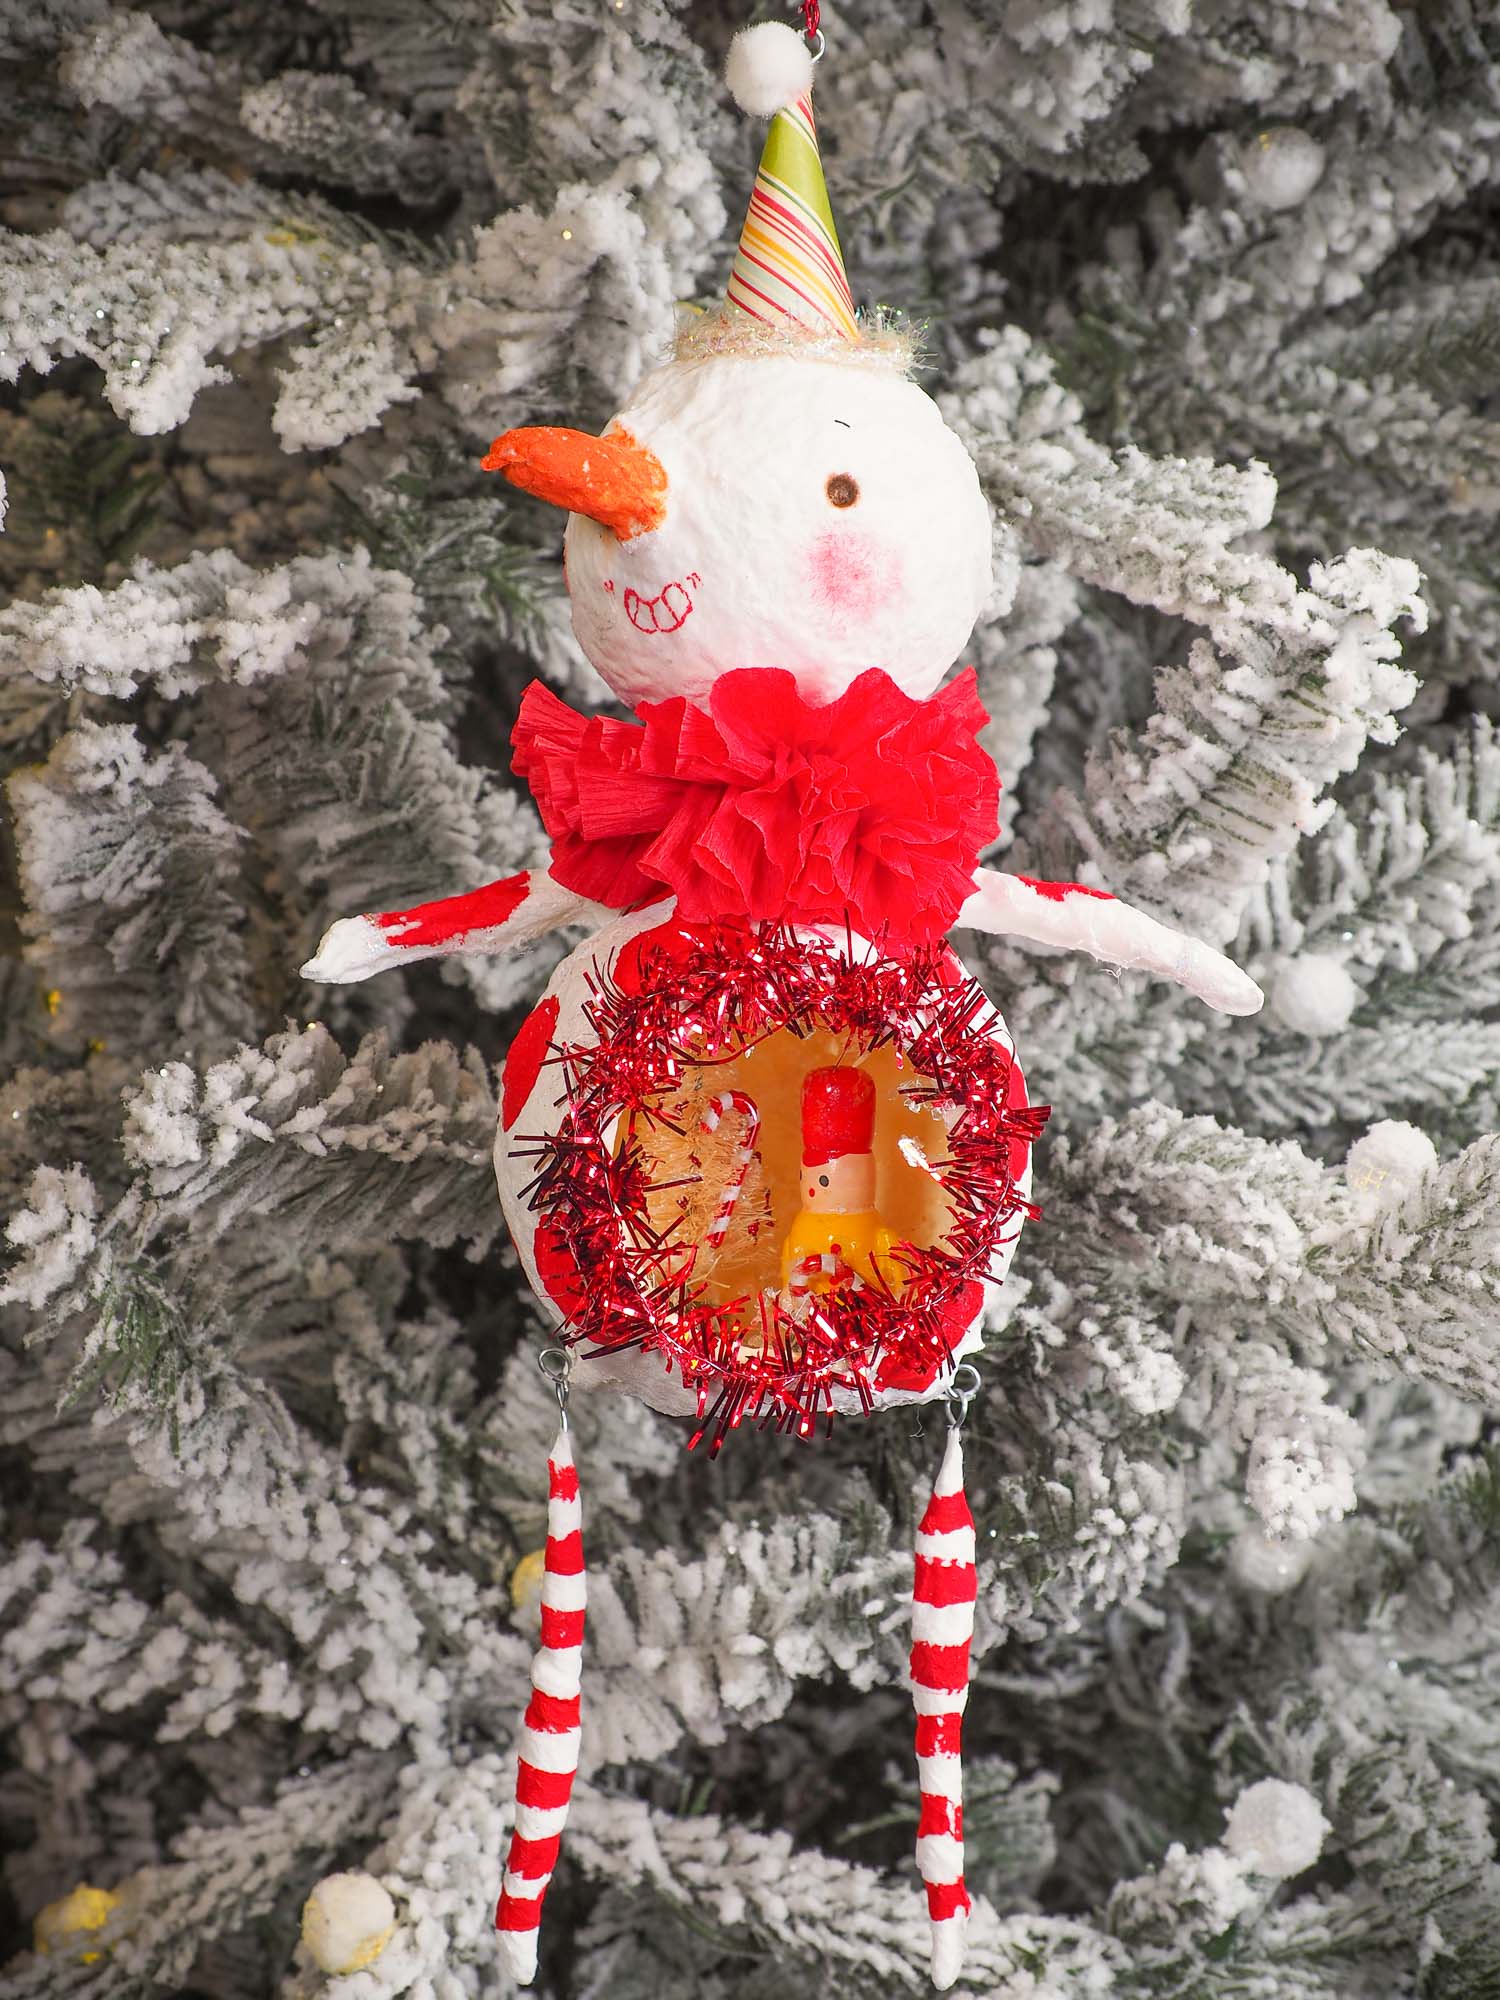 Adorable handmade spun cotton Art Doll Christmas tree ornament by Idania Salcido, the artist by Danita Art. Hand painted by the artist holiday figurine with paper hat with tinsel and vintage style garlands and a tiny Christmas tree. Hang this handmade ornament from your Christmas tree or use as Holiday decoration.